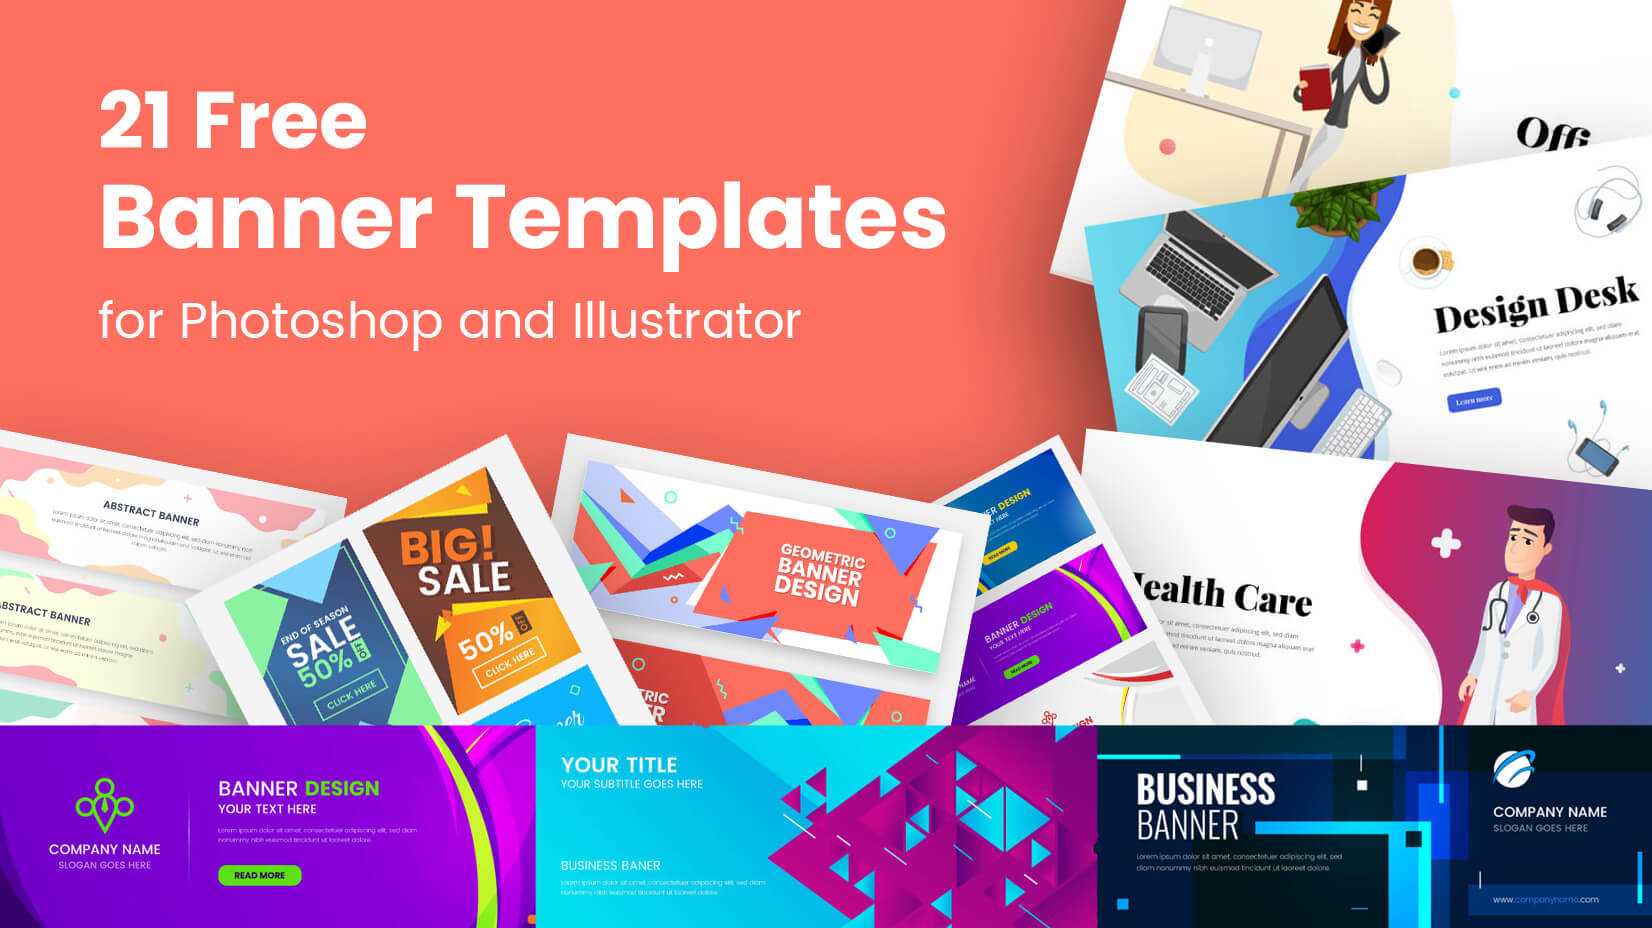 21 Free Banner Templates For Photoshop And Illustrator Regarding Banner Template For Photoshop